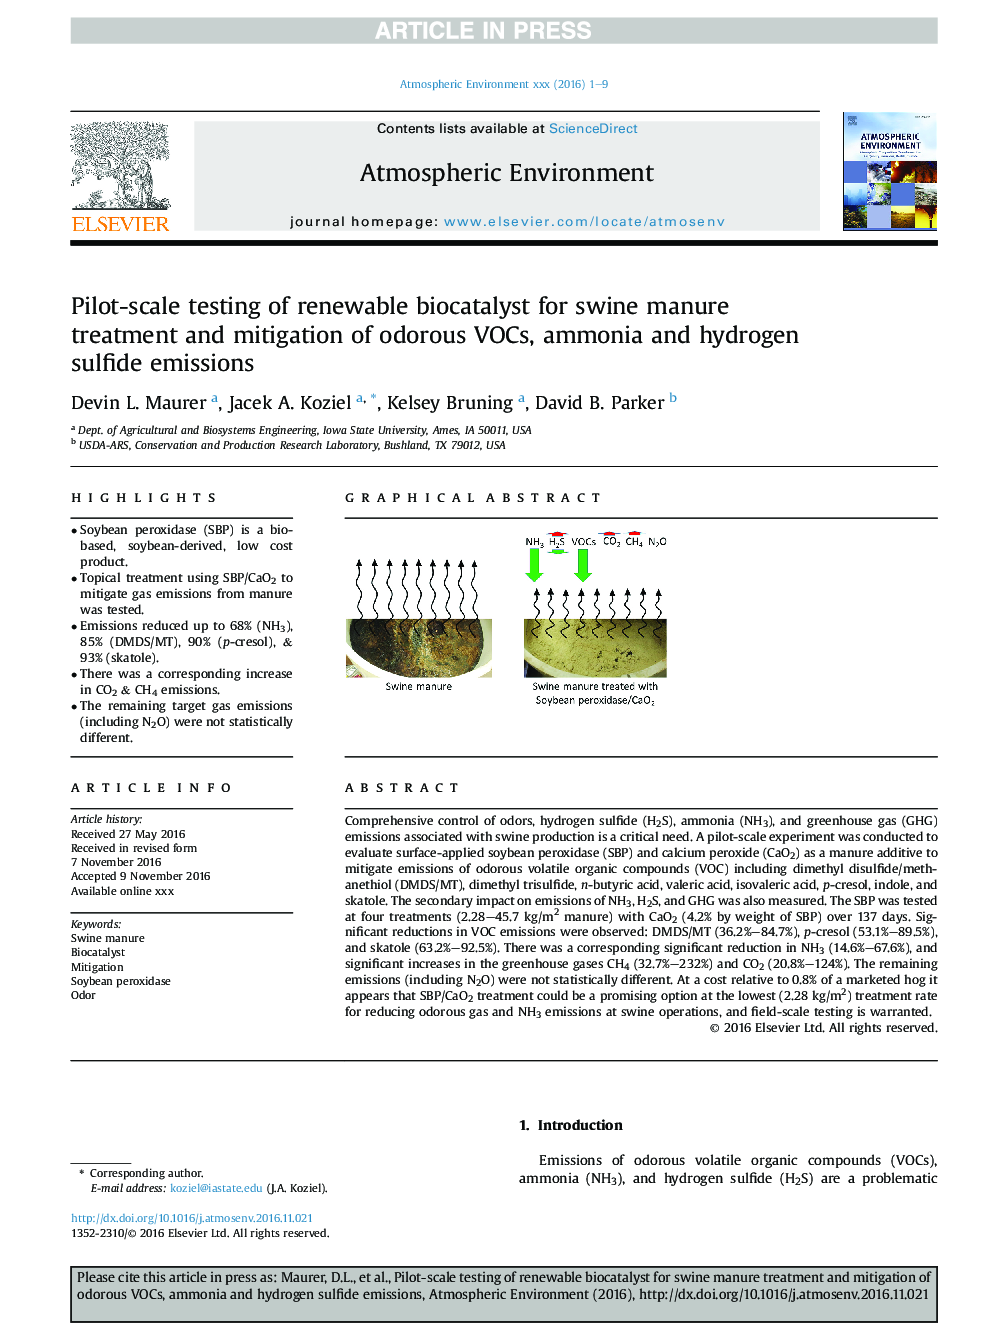 Pilot-scale testing of renewable biocatalyst for swine manure treatment and mitigation of odorous VOCs, ammonia and hydrogen sulfide emissions